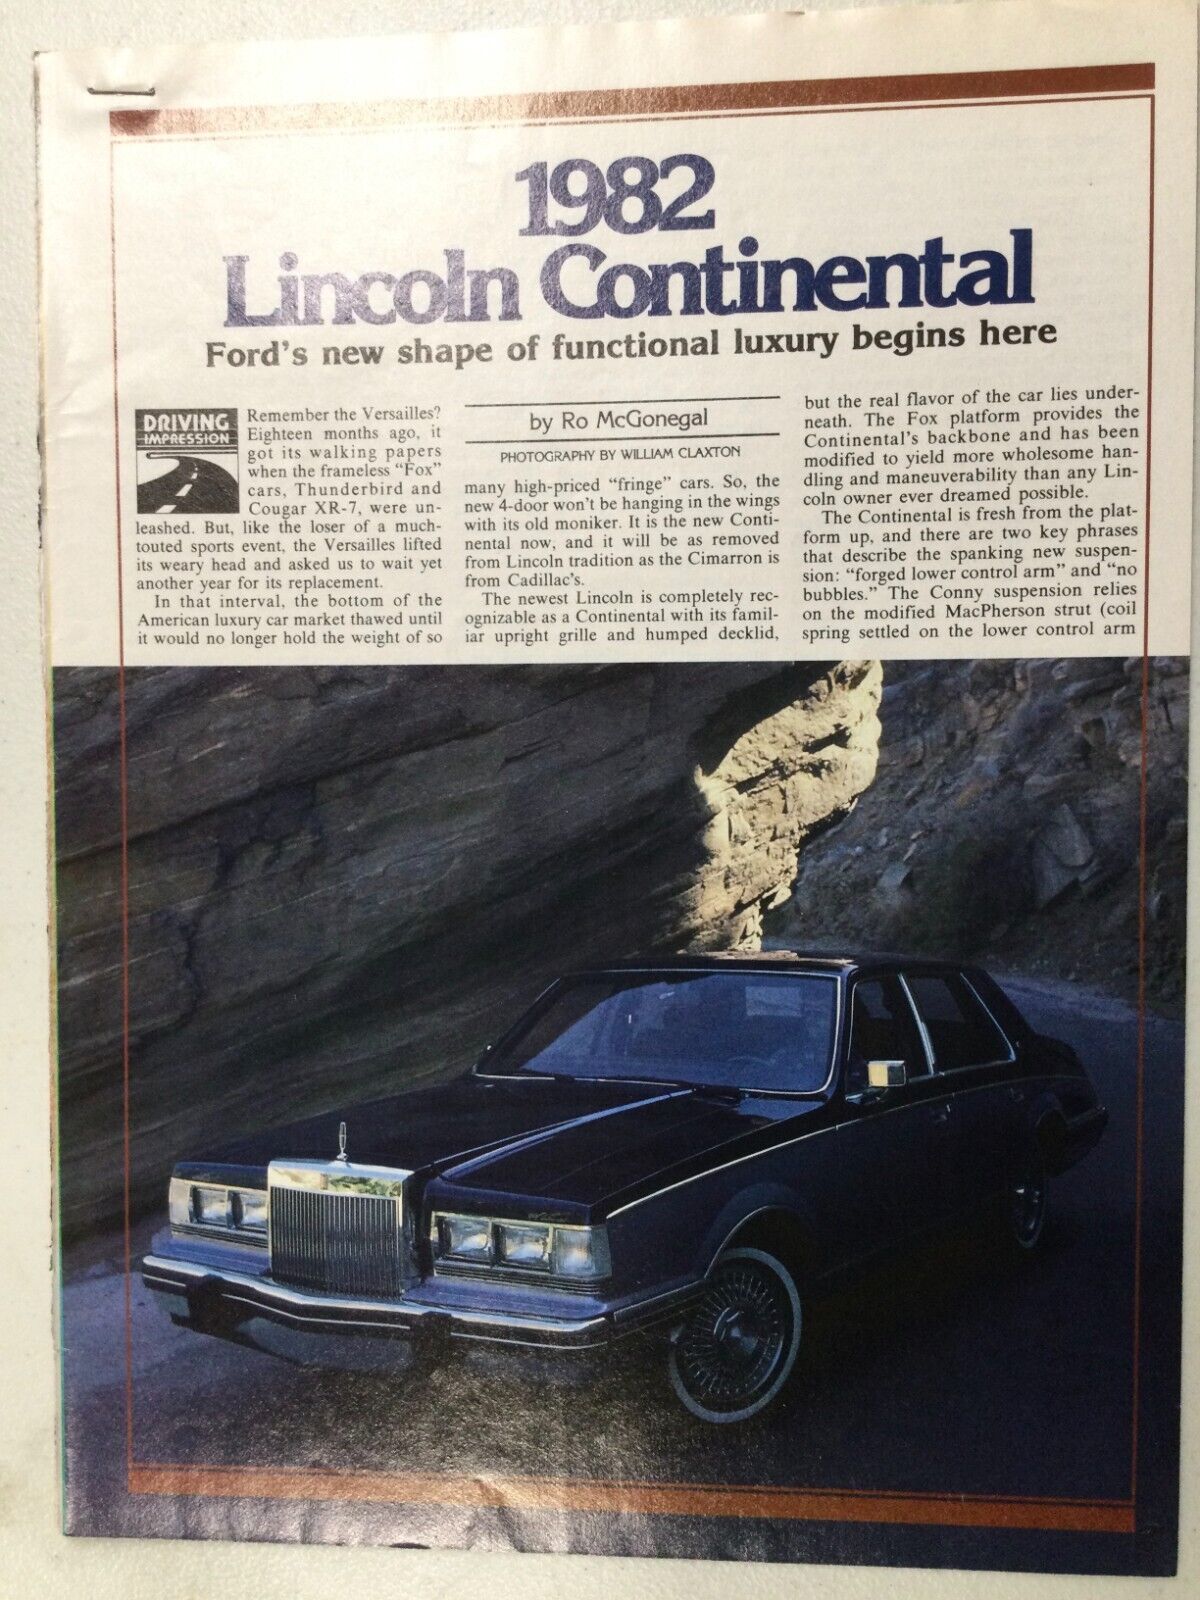 LincolnArt82 Article 1982 Lincoln Continental August 1981 4 page